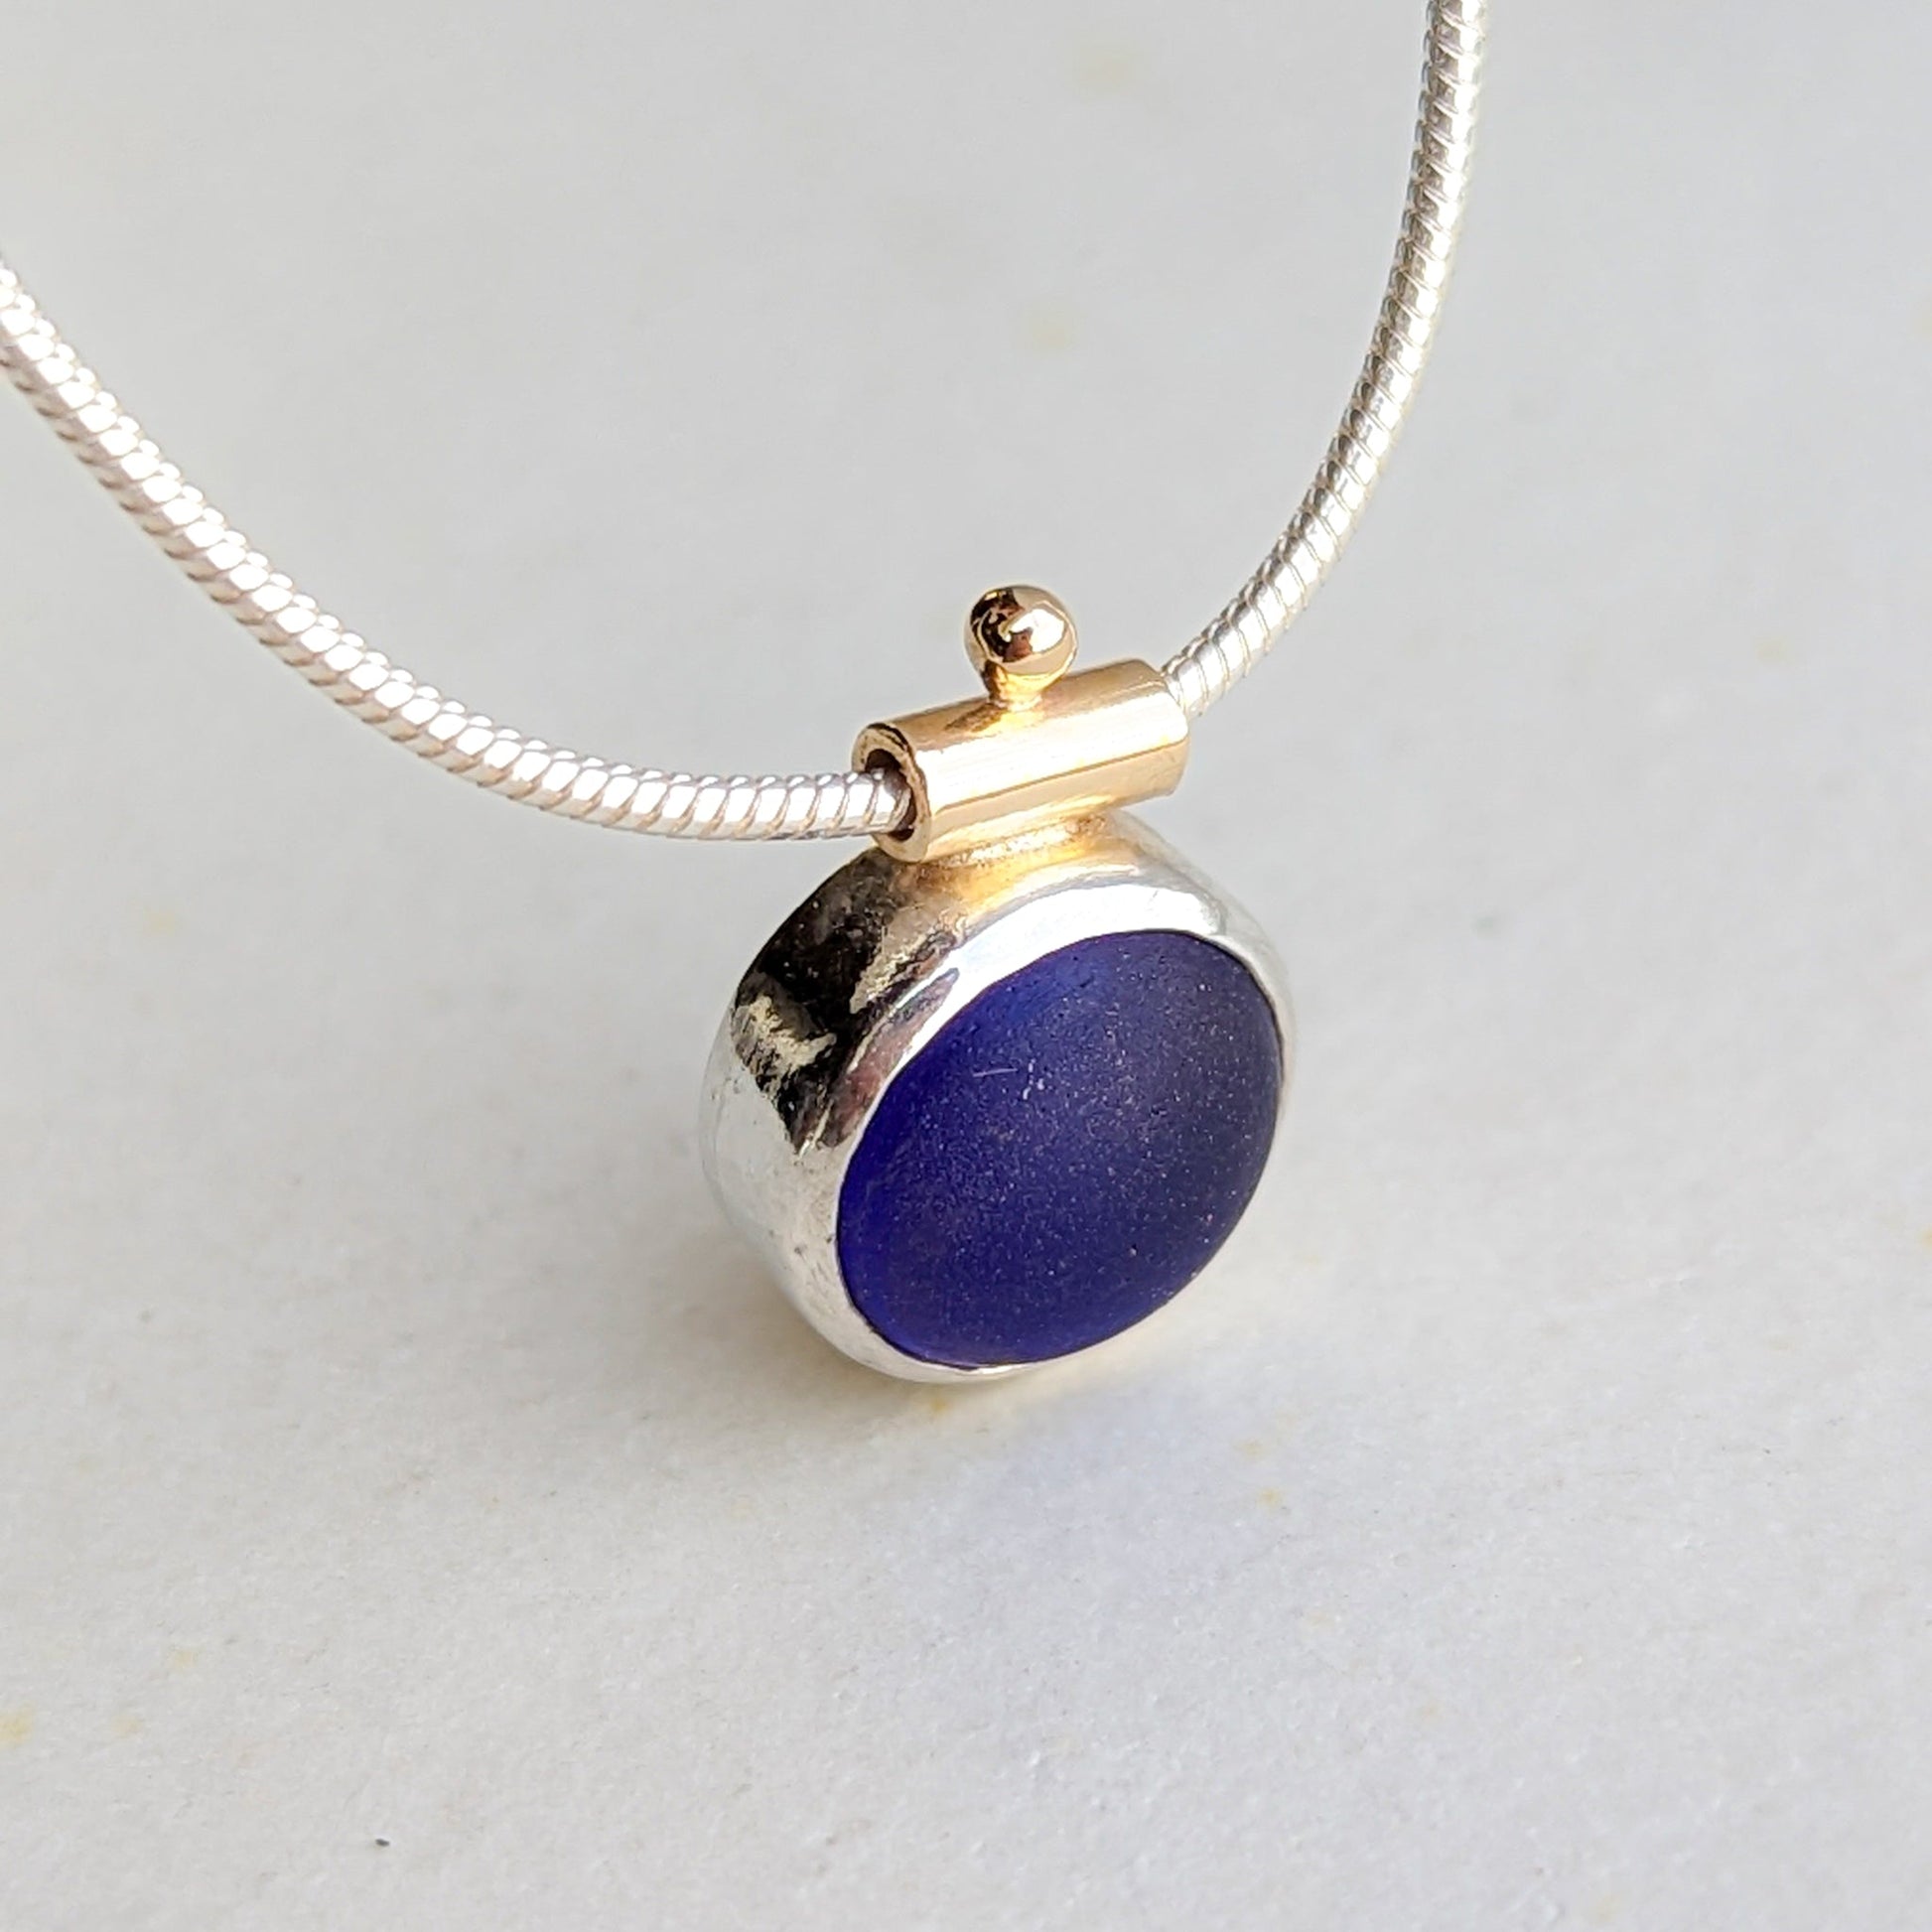 Silver and gold snake necklace with deep blue round sea glass